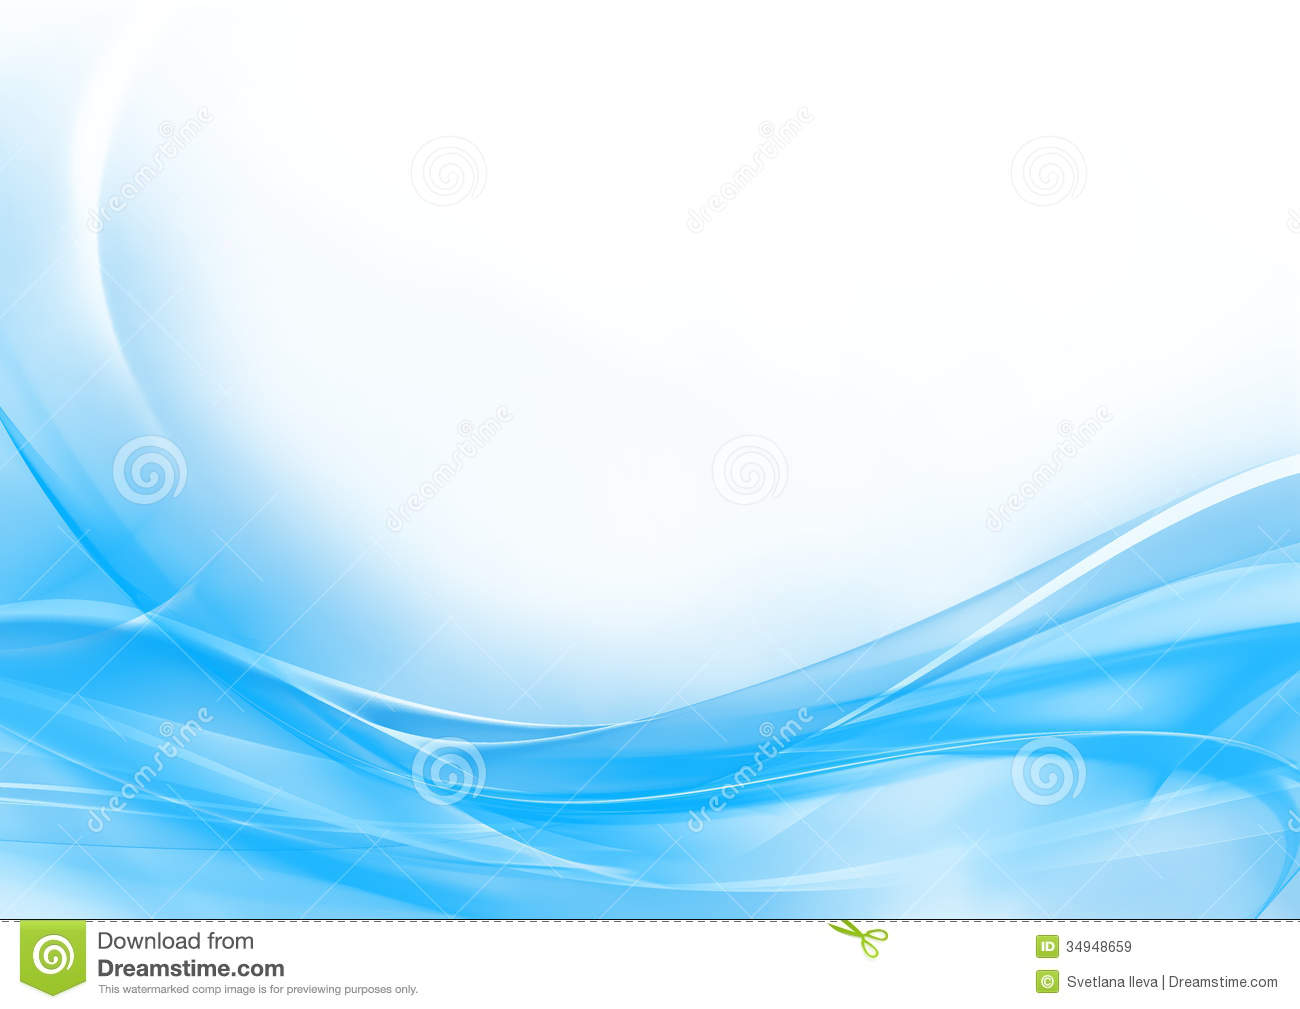 Blue and White Abstract Design